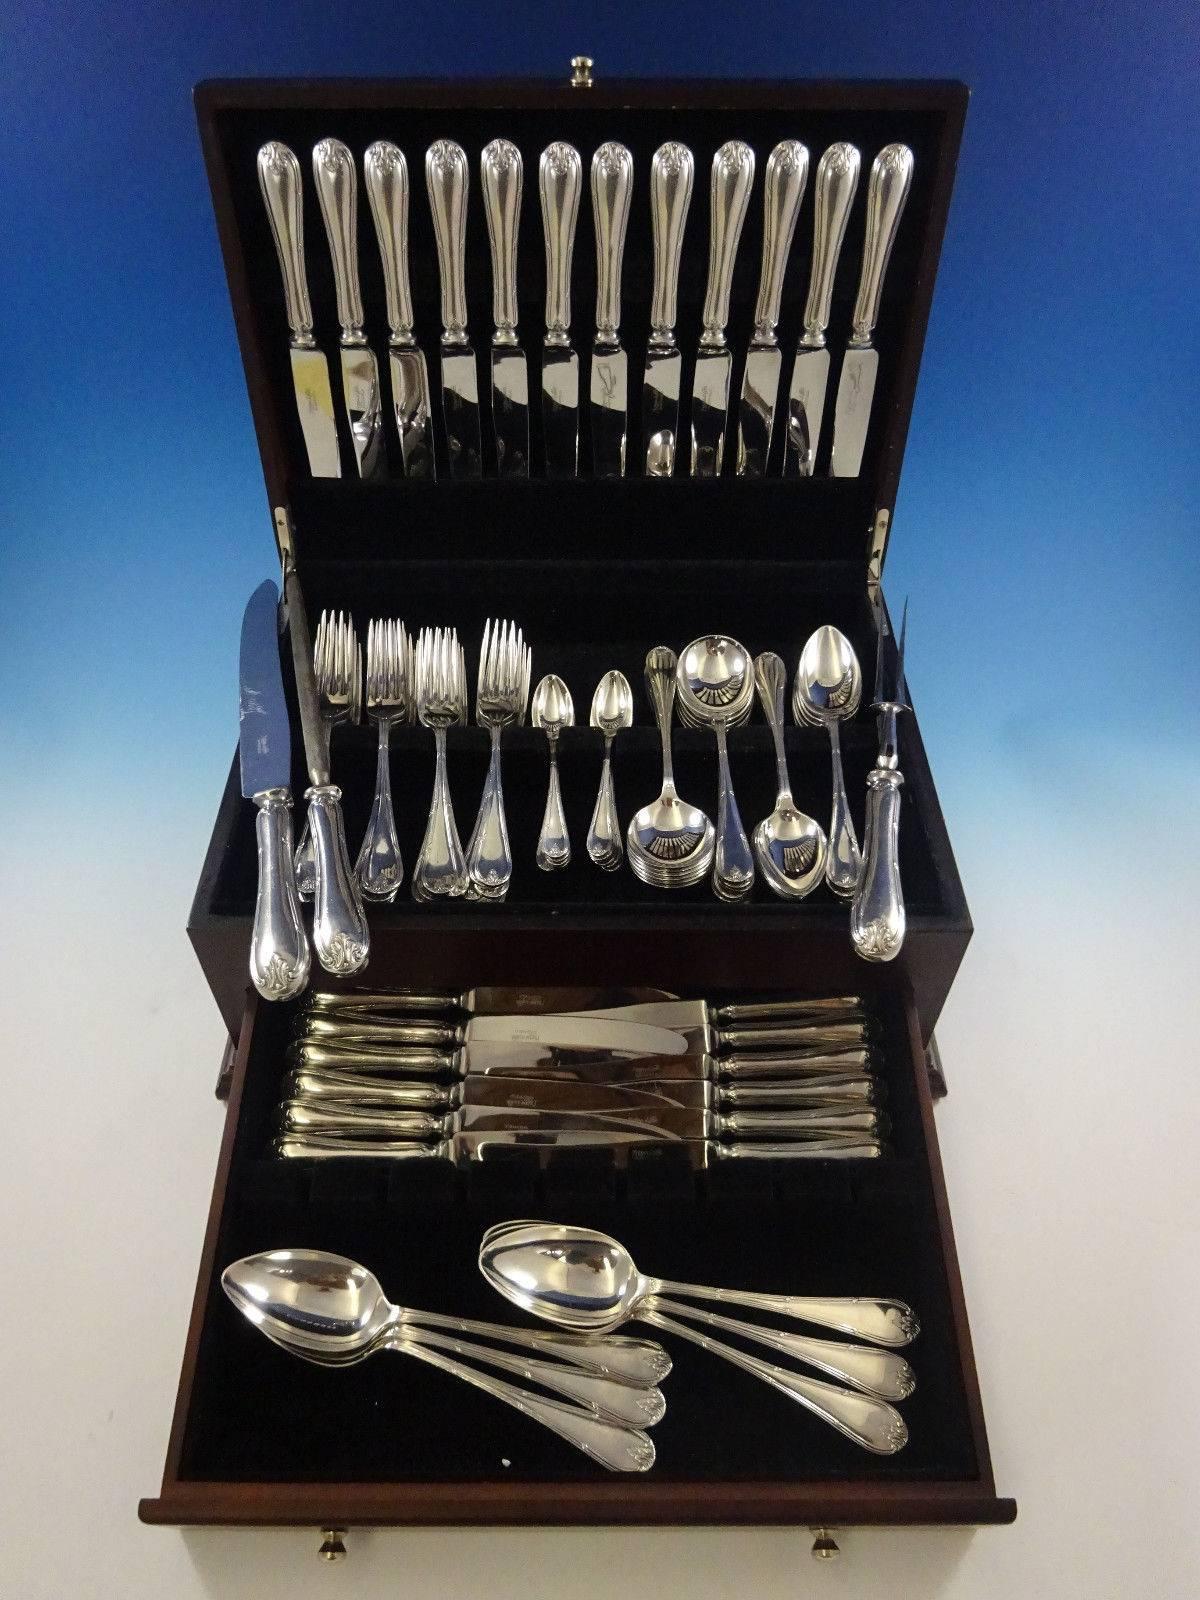 Louis XVI by Mappin & Webb English silver plate flatware set of 92 pieces.

This set includes: 
 
 
12 dinner knives, 9 3/8